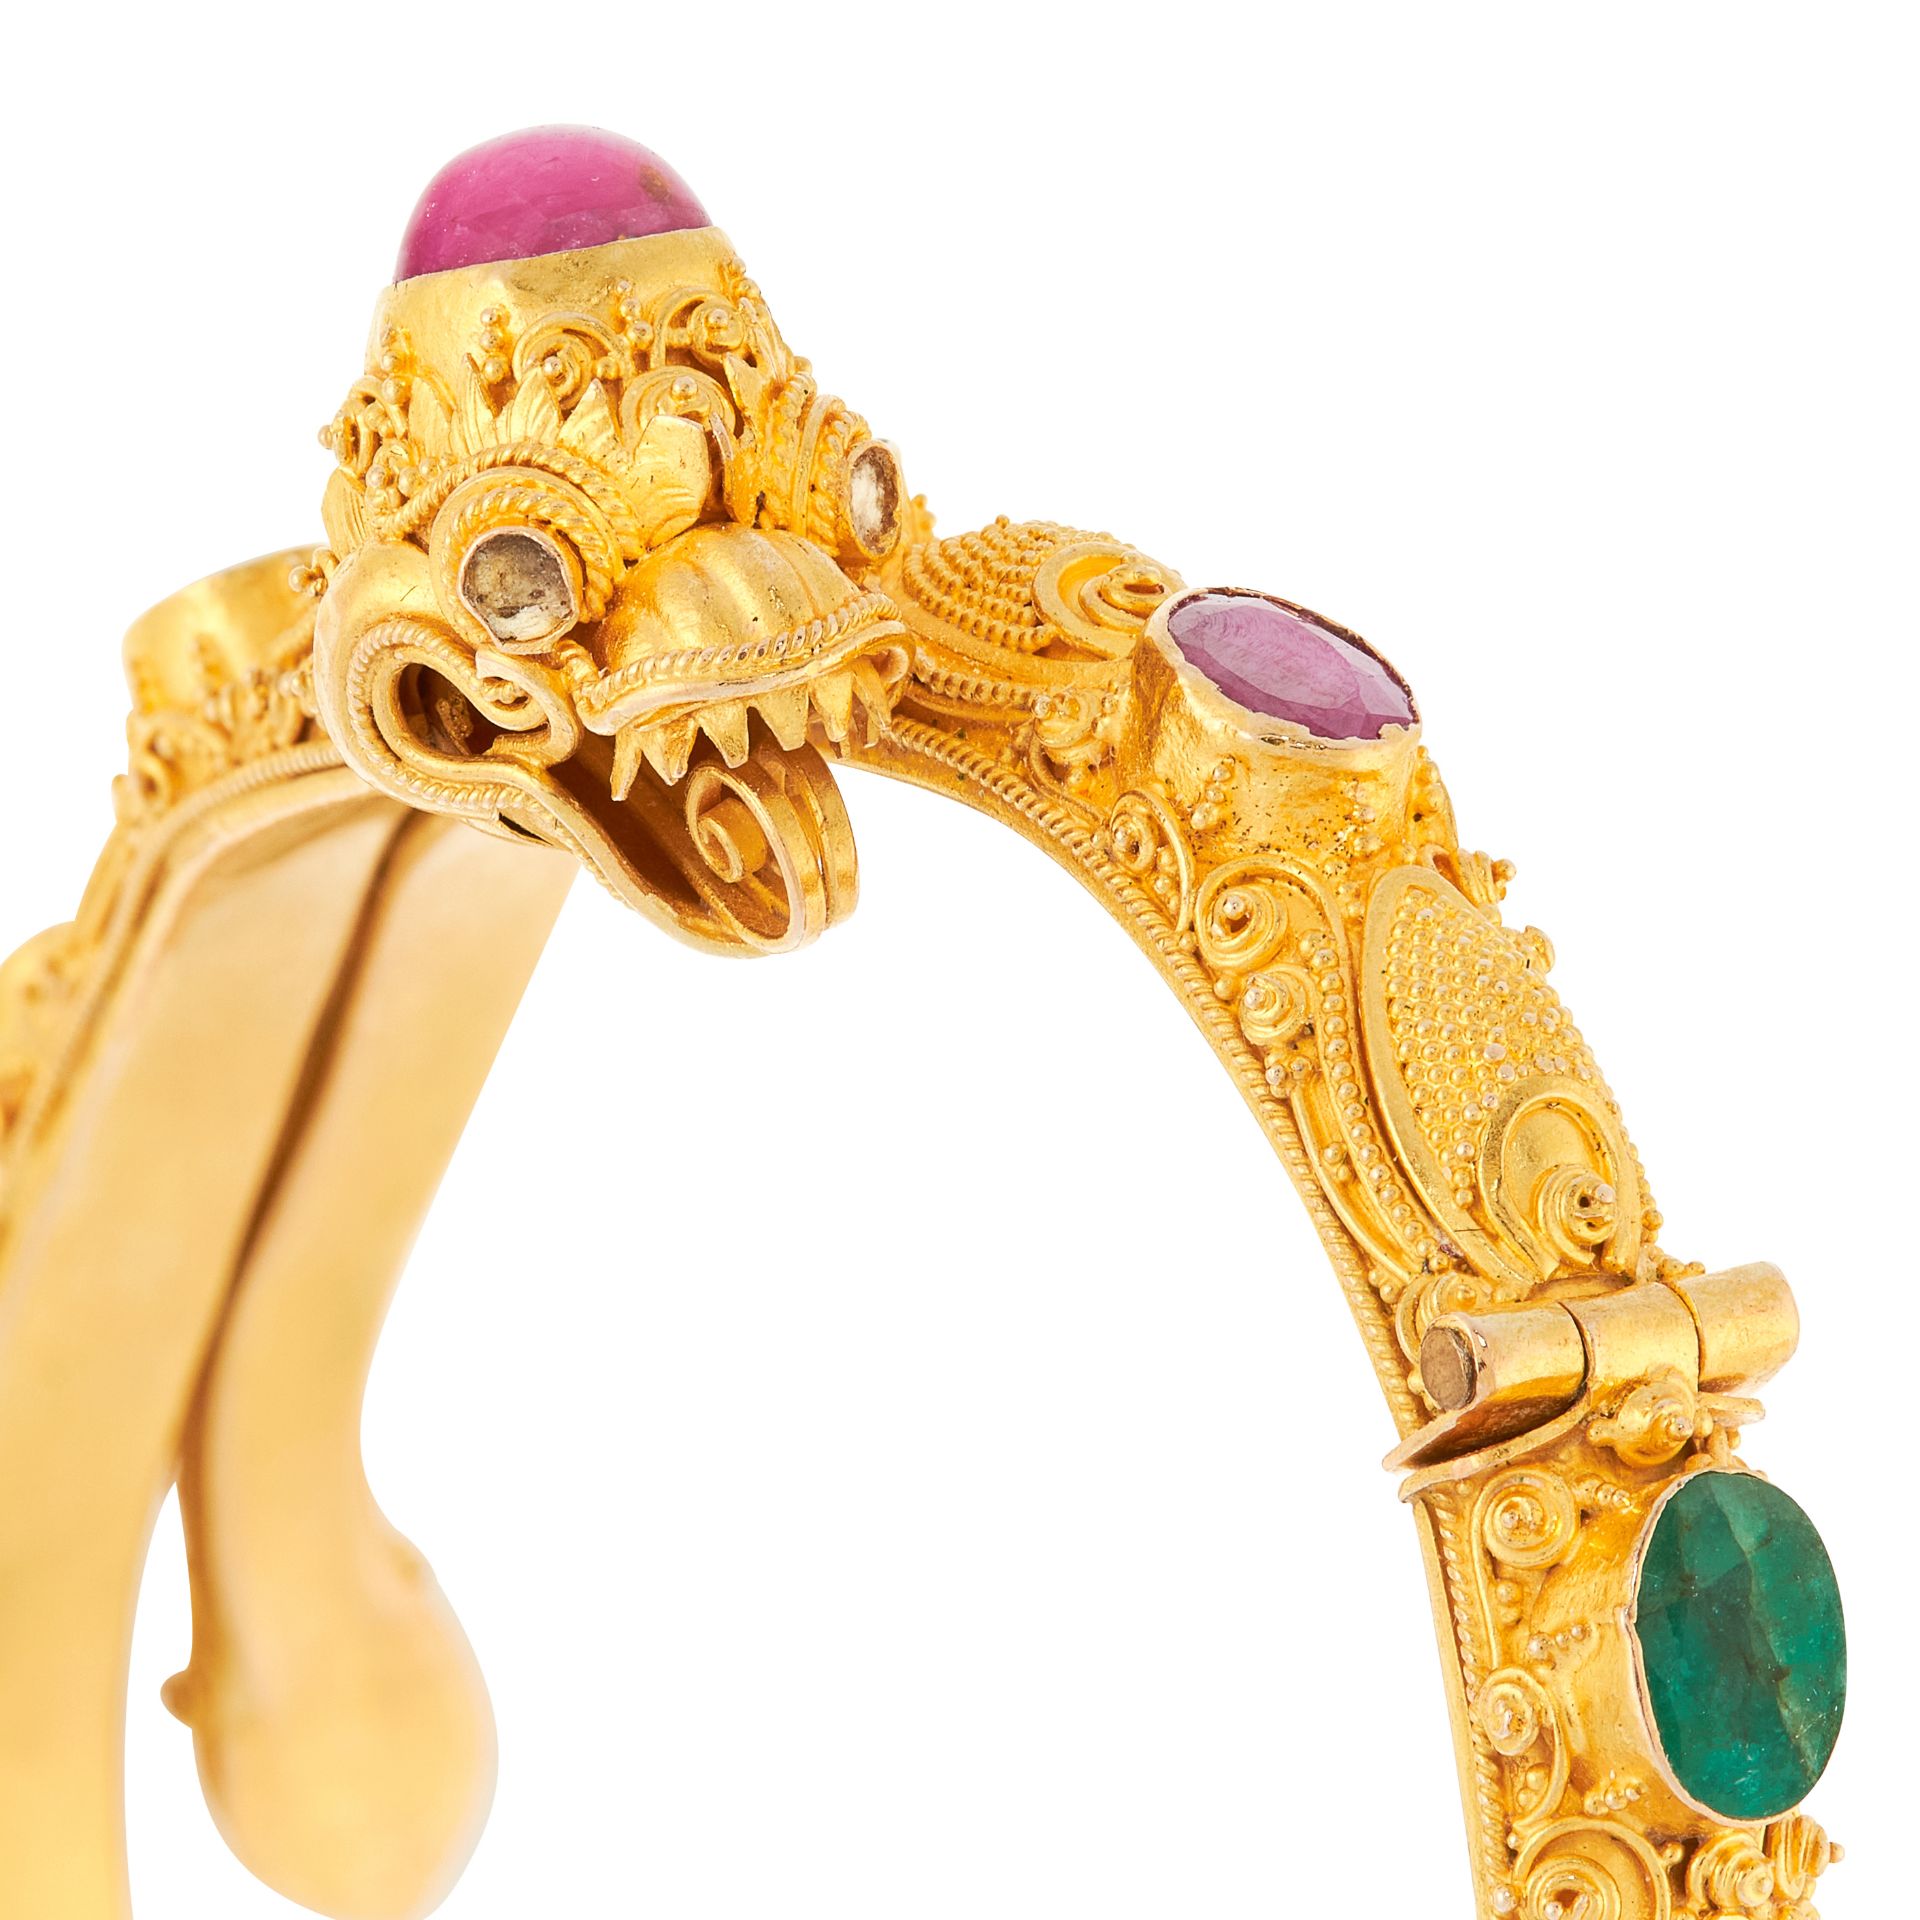 A RUBY AND EMERALD CHINESE DRAGON BANGLE in 22ct yellow gold, designed as the body of a dragon - Image 2 of 2